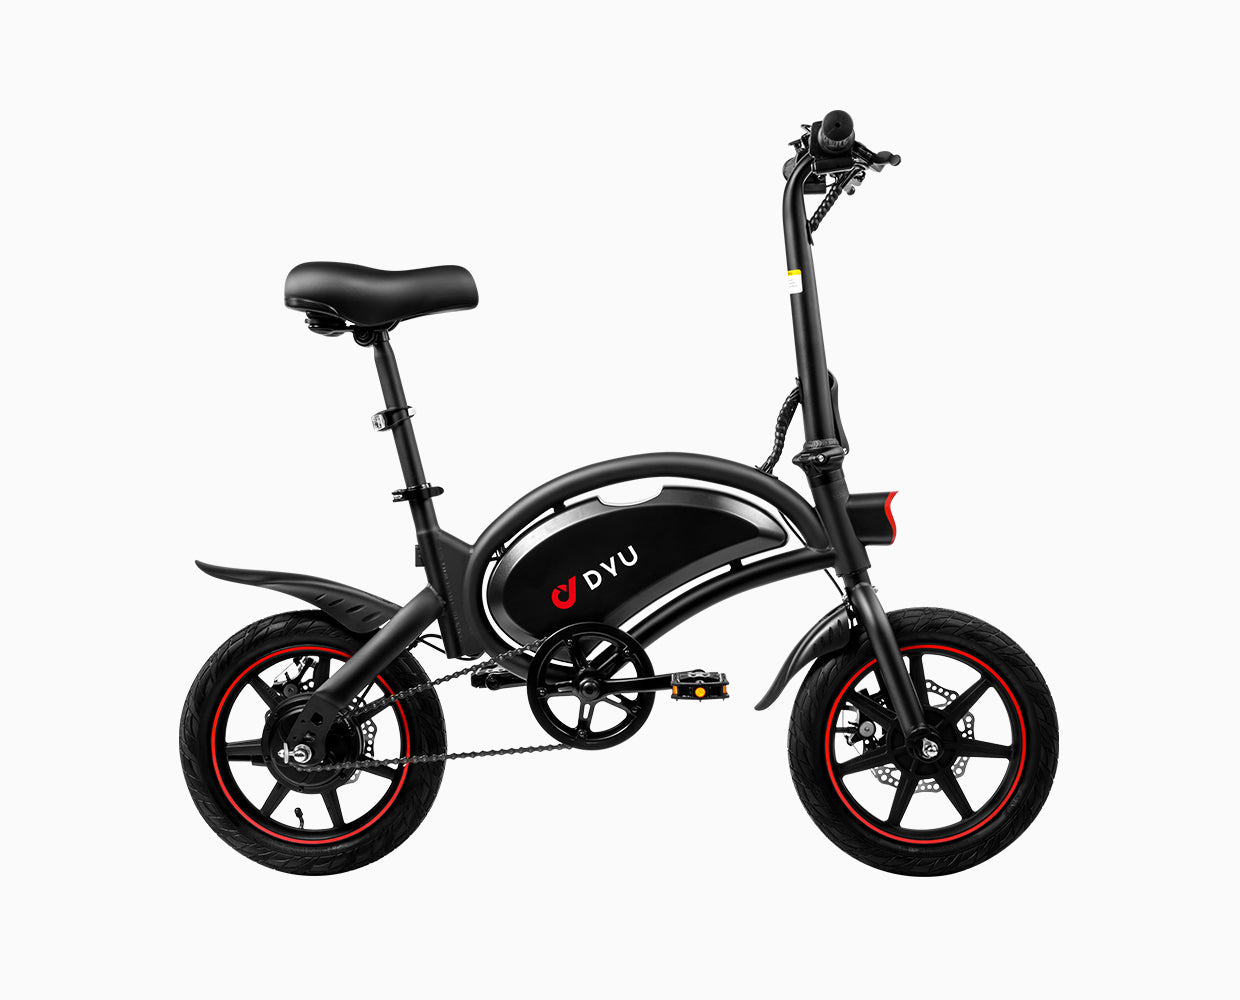 DYU eBike Summer Sale Deals up to €300 off Compact and Folding